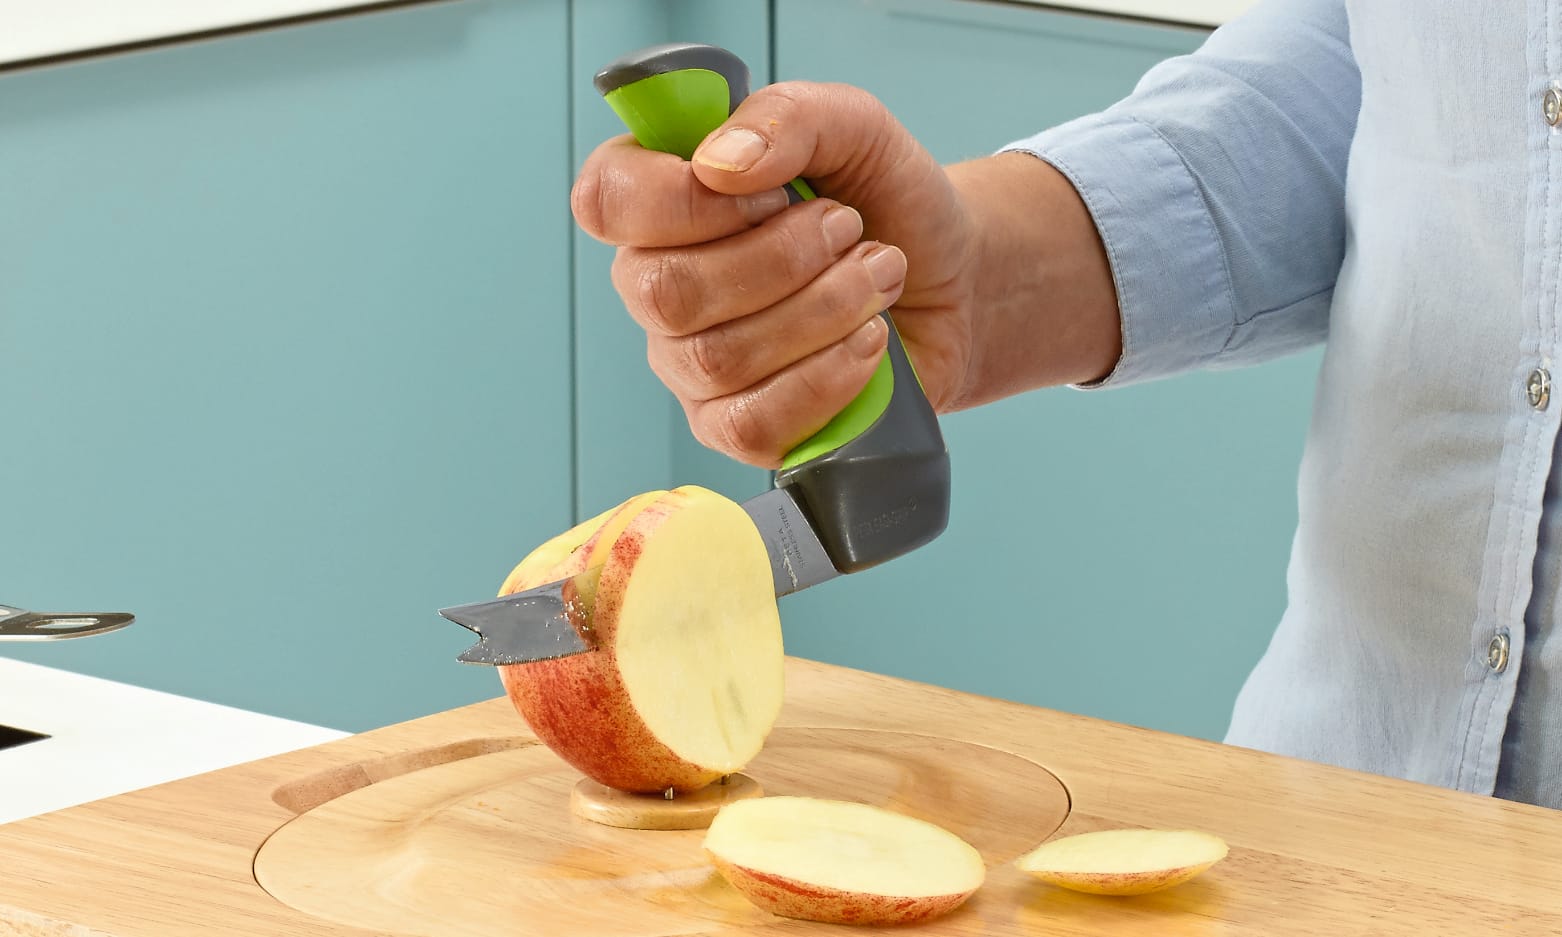 Gadgets for Arthritis: In the kitchen - The Active Hands Company